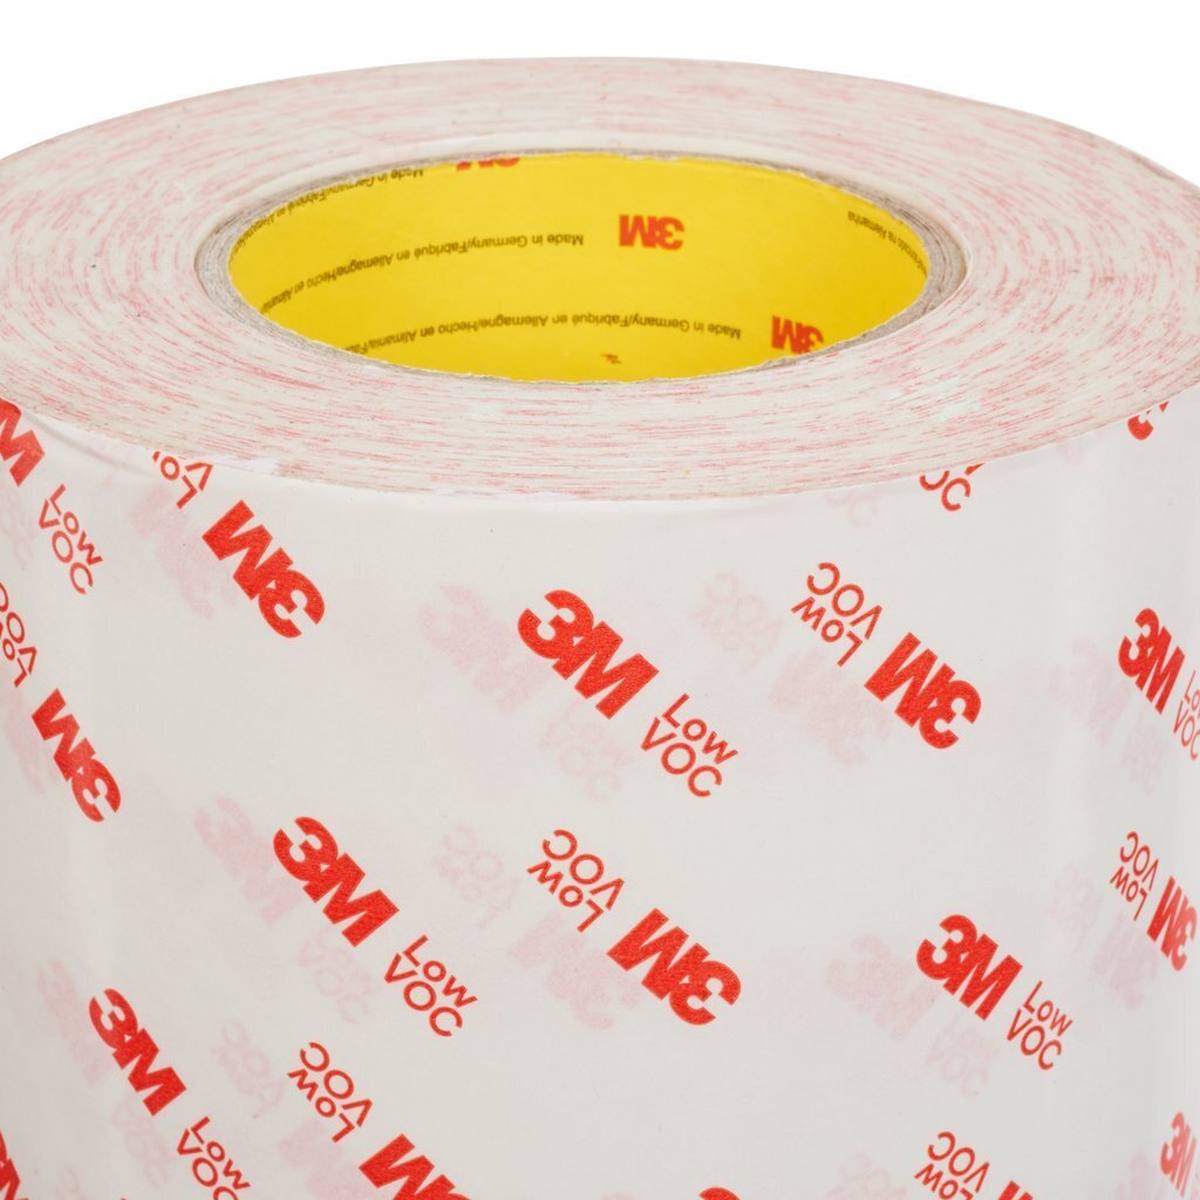 3M Double-sided adhesive tape with non-woven paper backing 99015LVC, white, 15 mm x 50 m, 0.15 mm